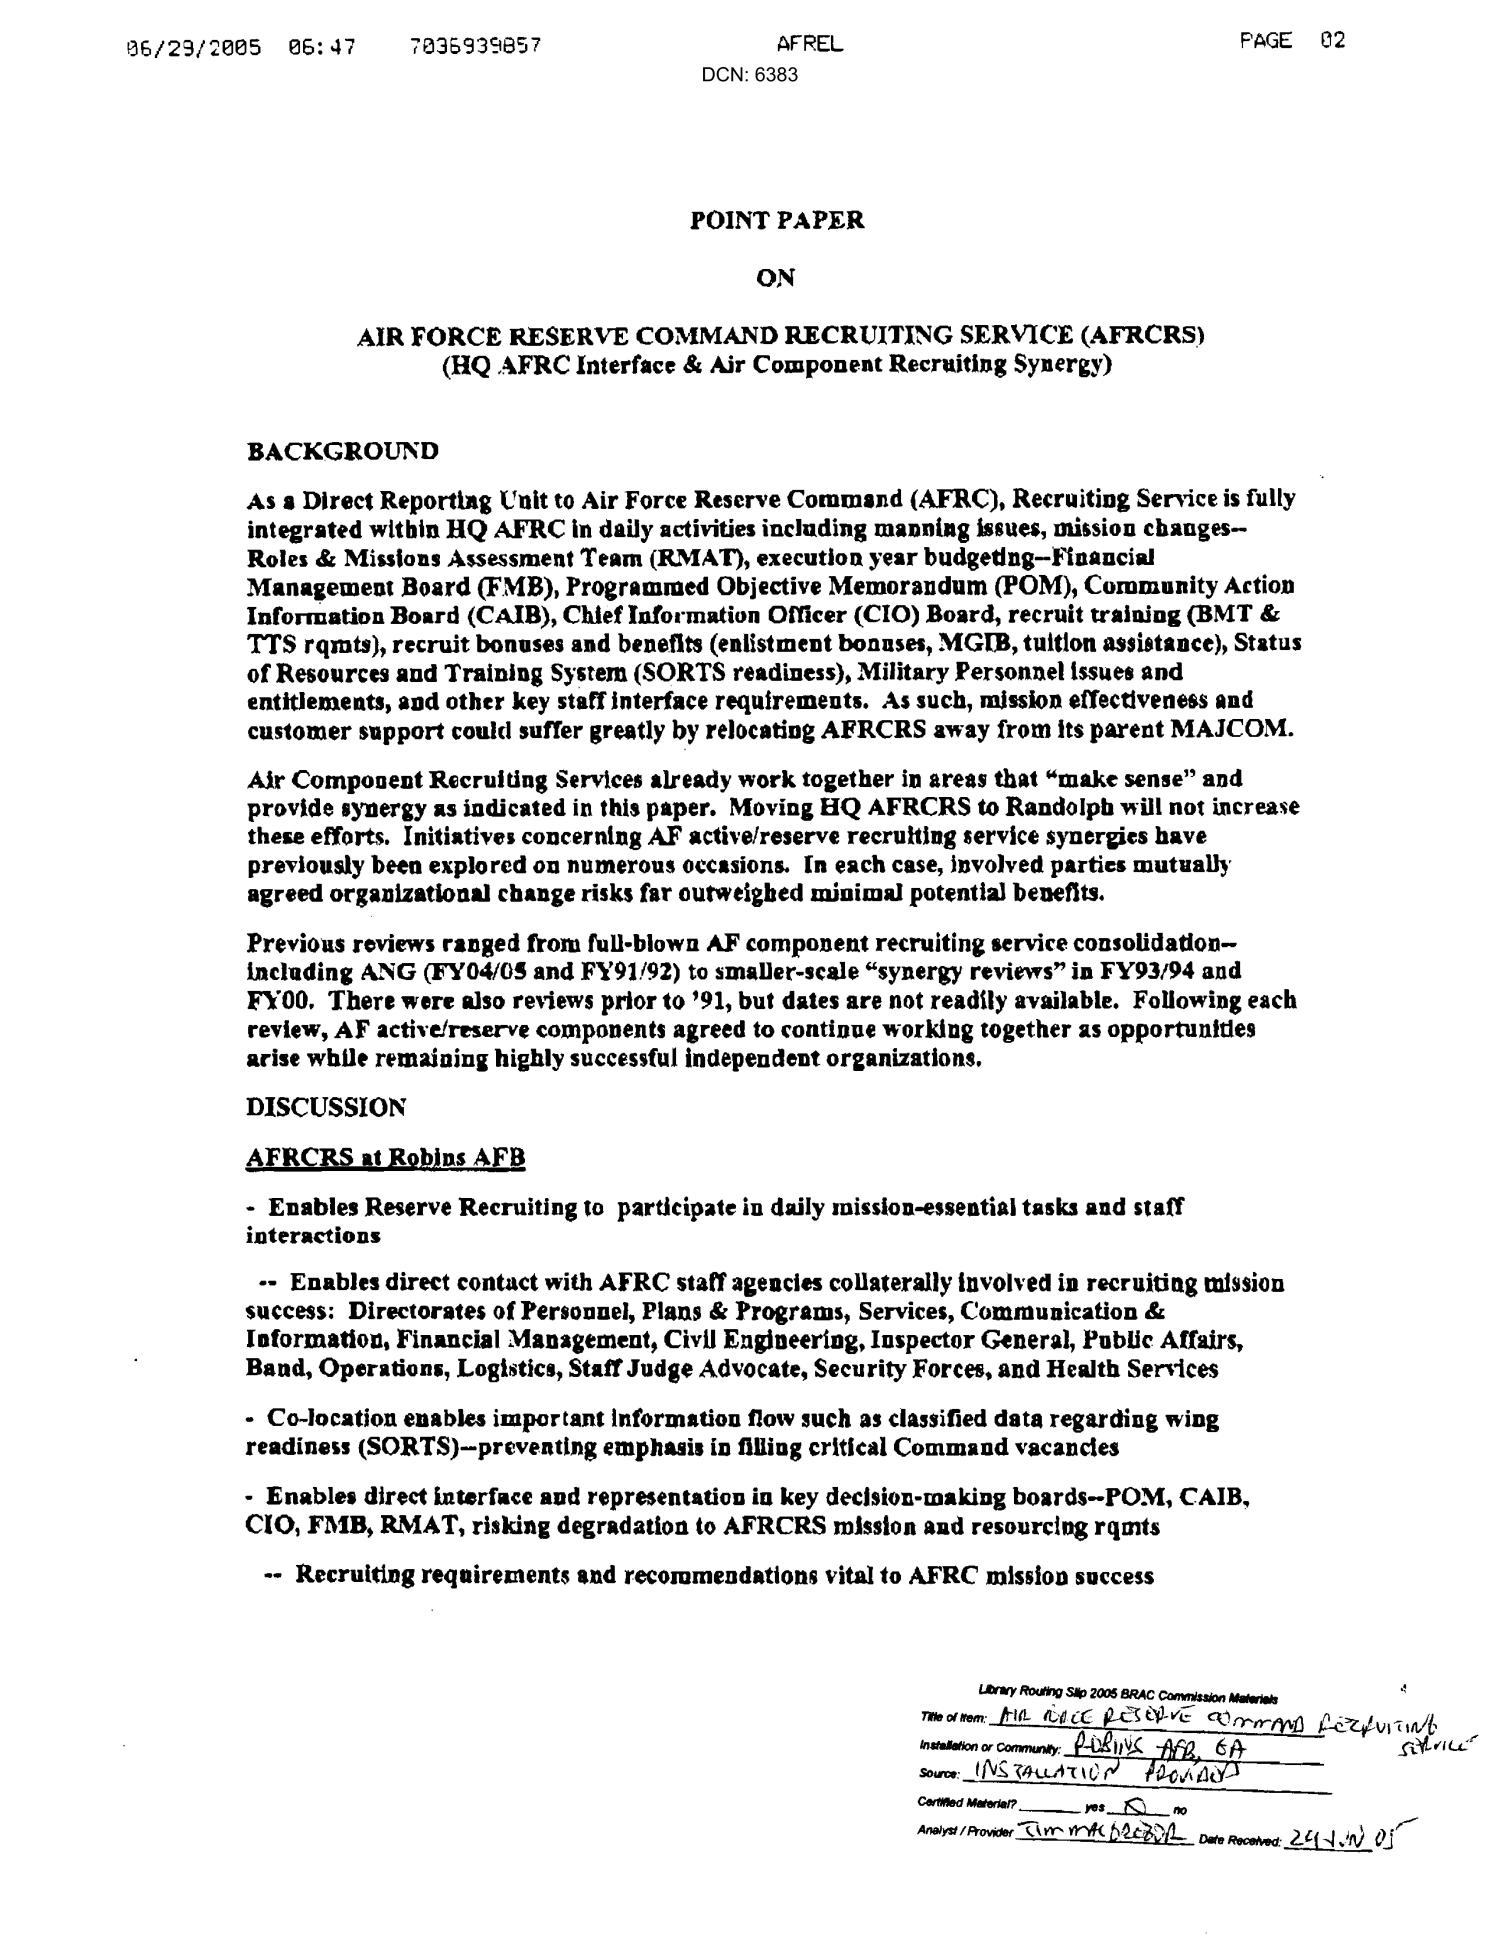 Point Paper on Air Force Reserve Command Recruiting Service (AFRCRS)
                                                
                                                    [Sequence #]: 1 of 3
                                                